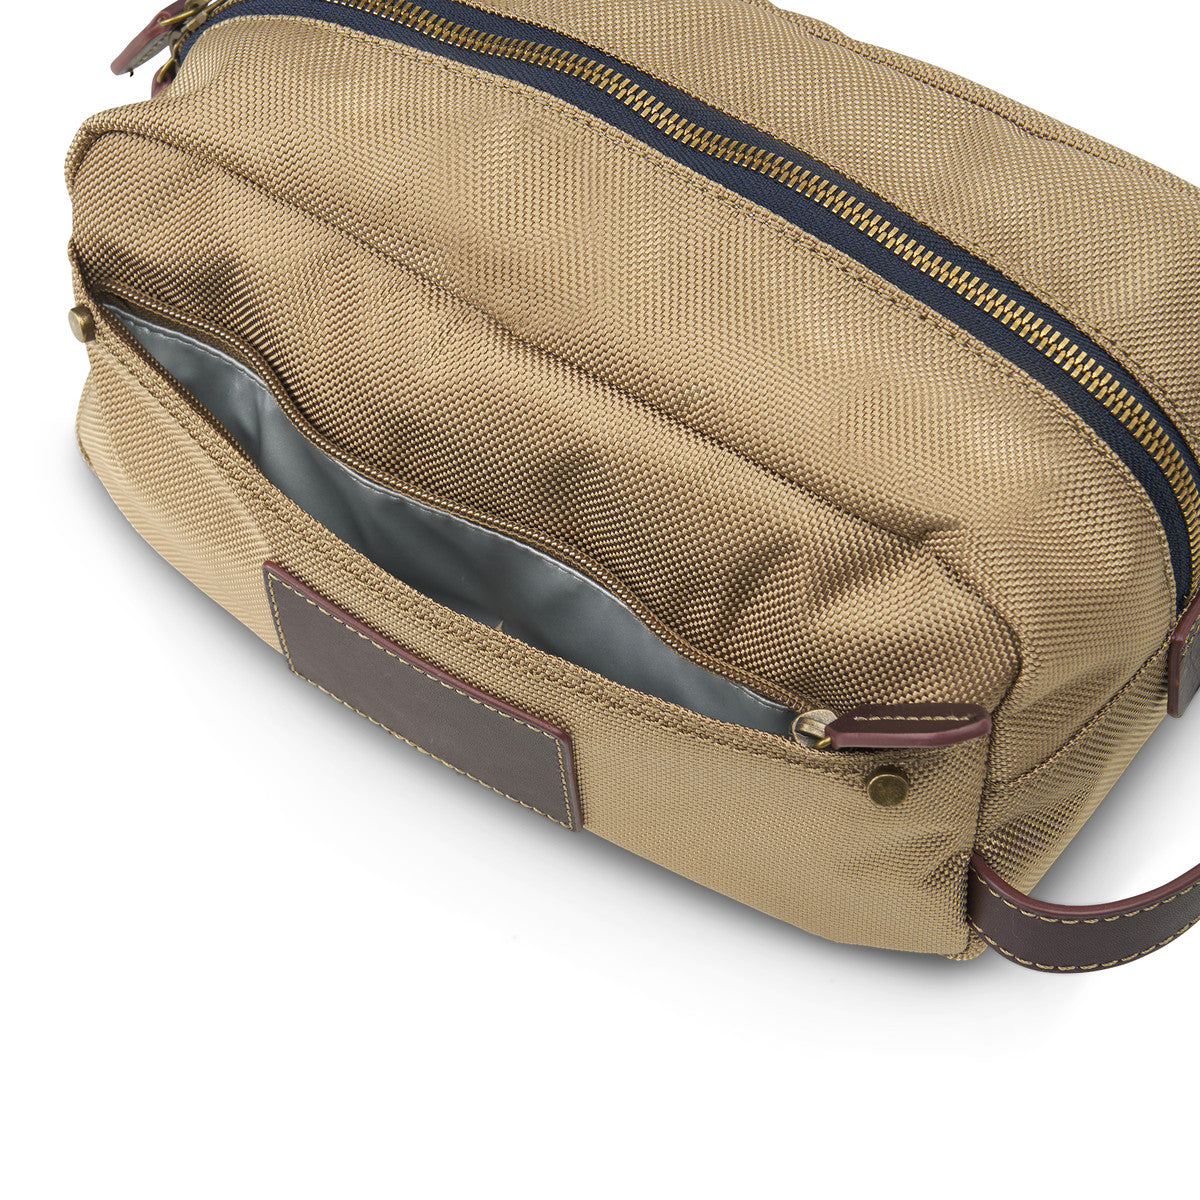 Dennis Dopp Kit with Monogram - CALL TO SPECIAL ORDER